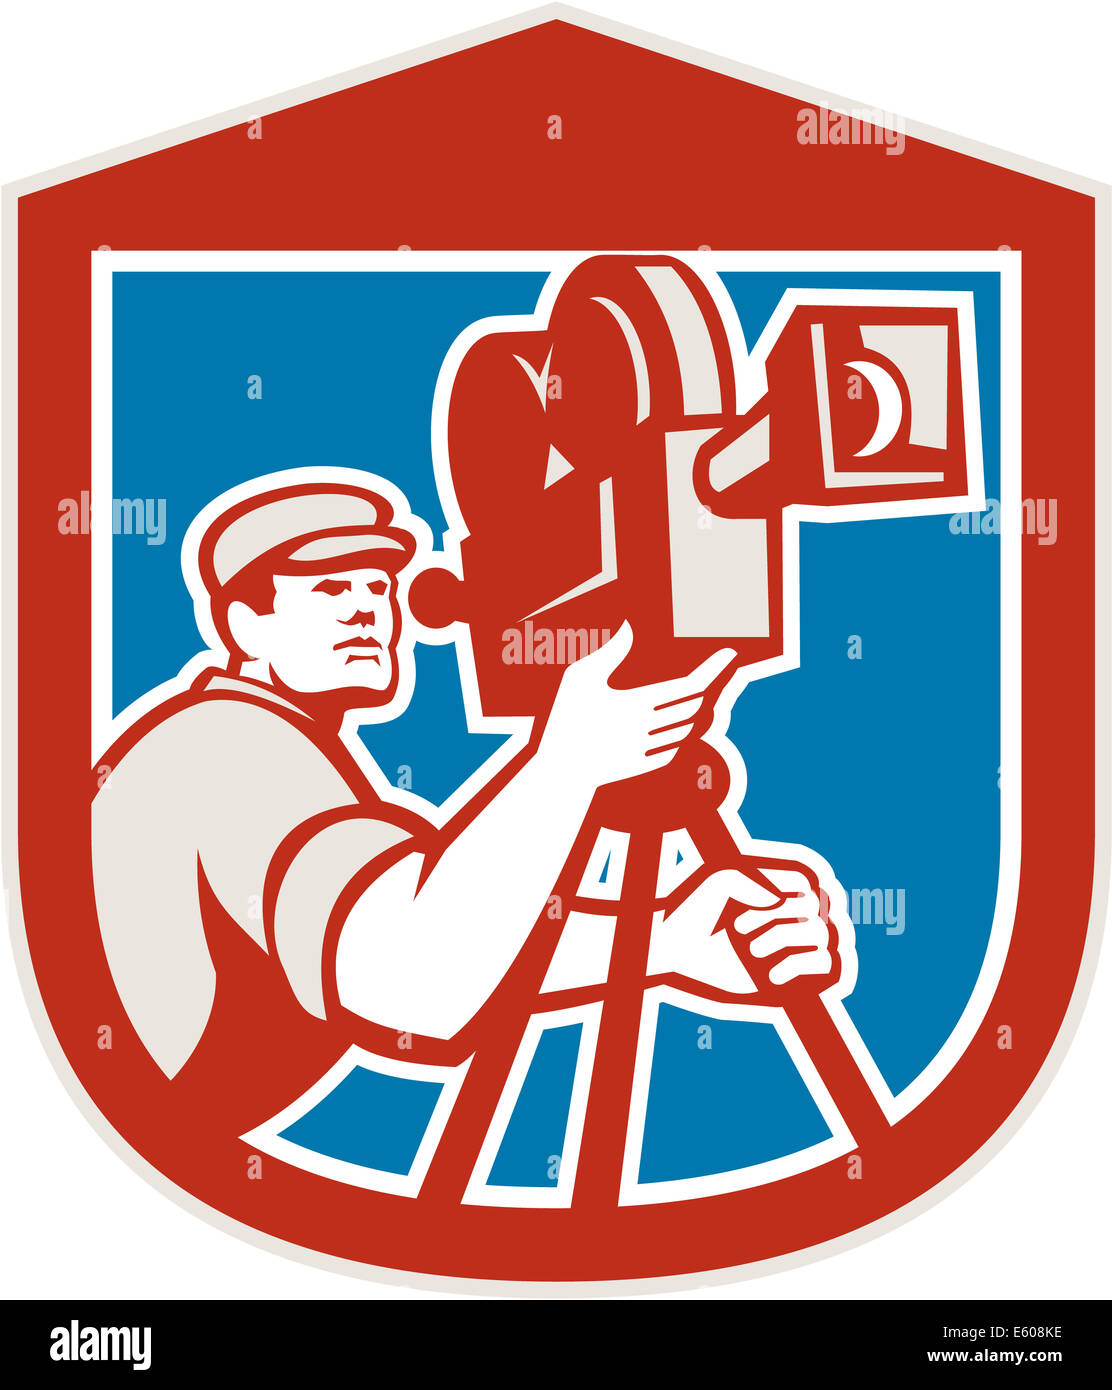 Illustration of a cameraman movie director with vintage movie film camera set inside shield crest on isolated background done in retro style. Stock Photo